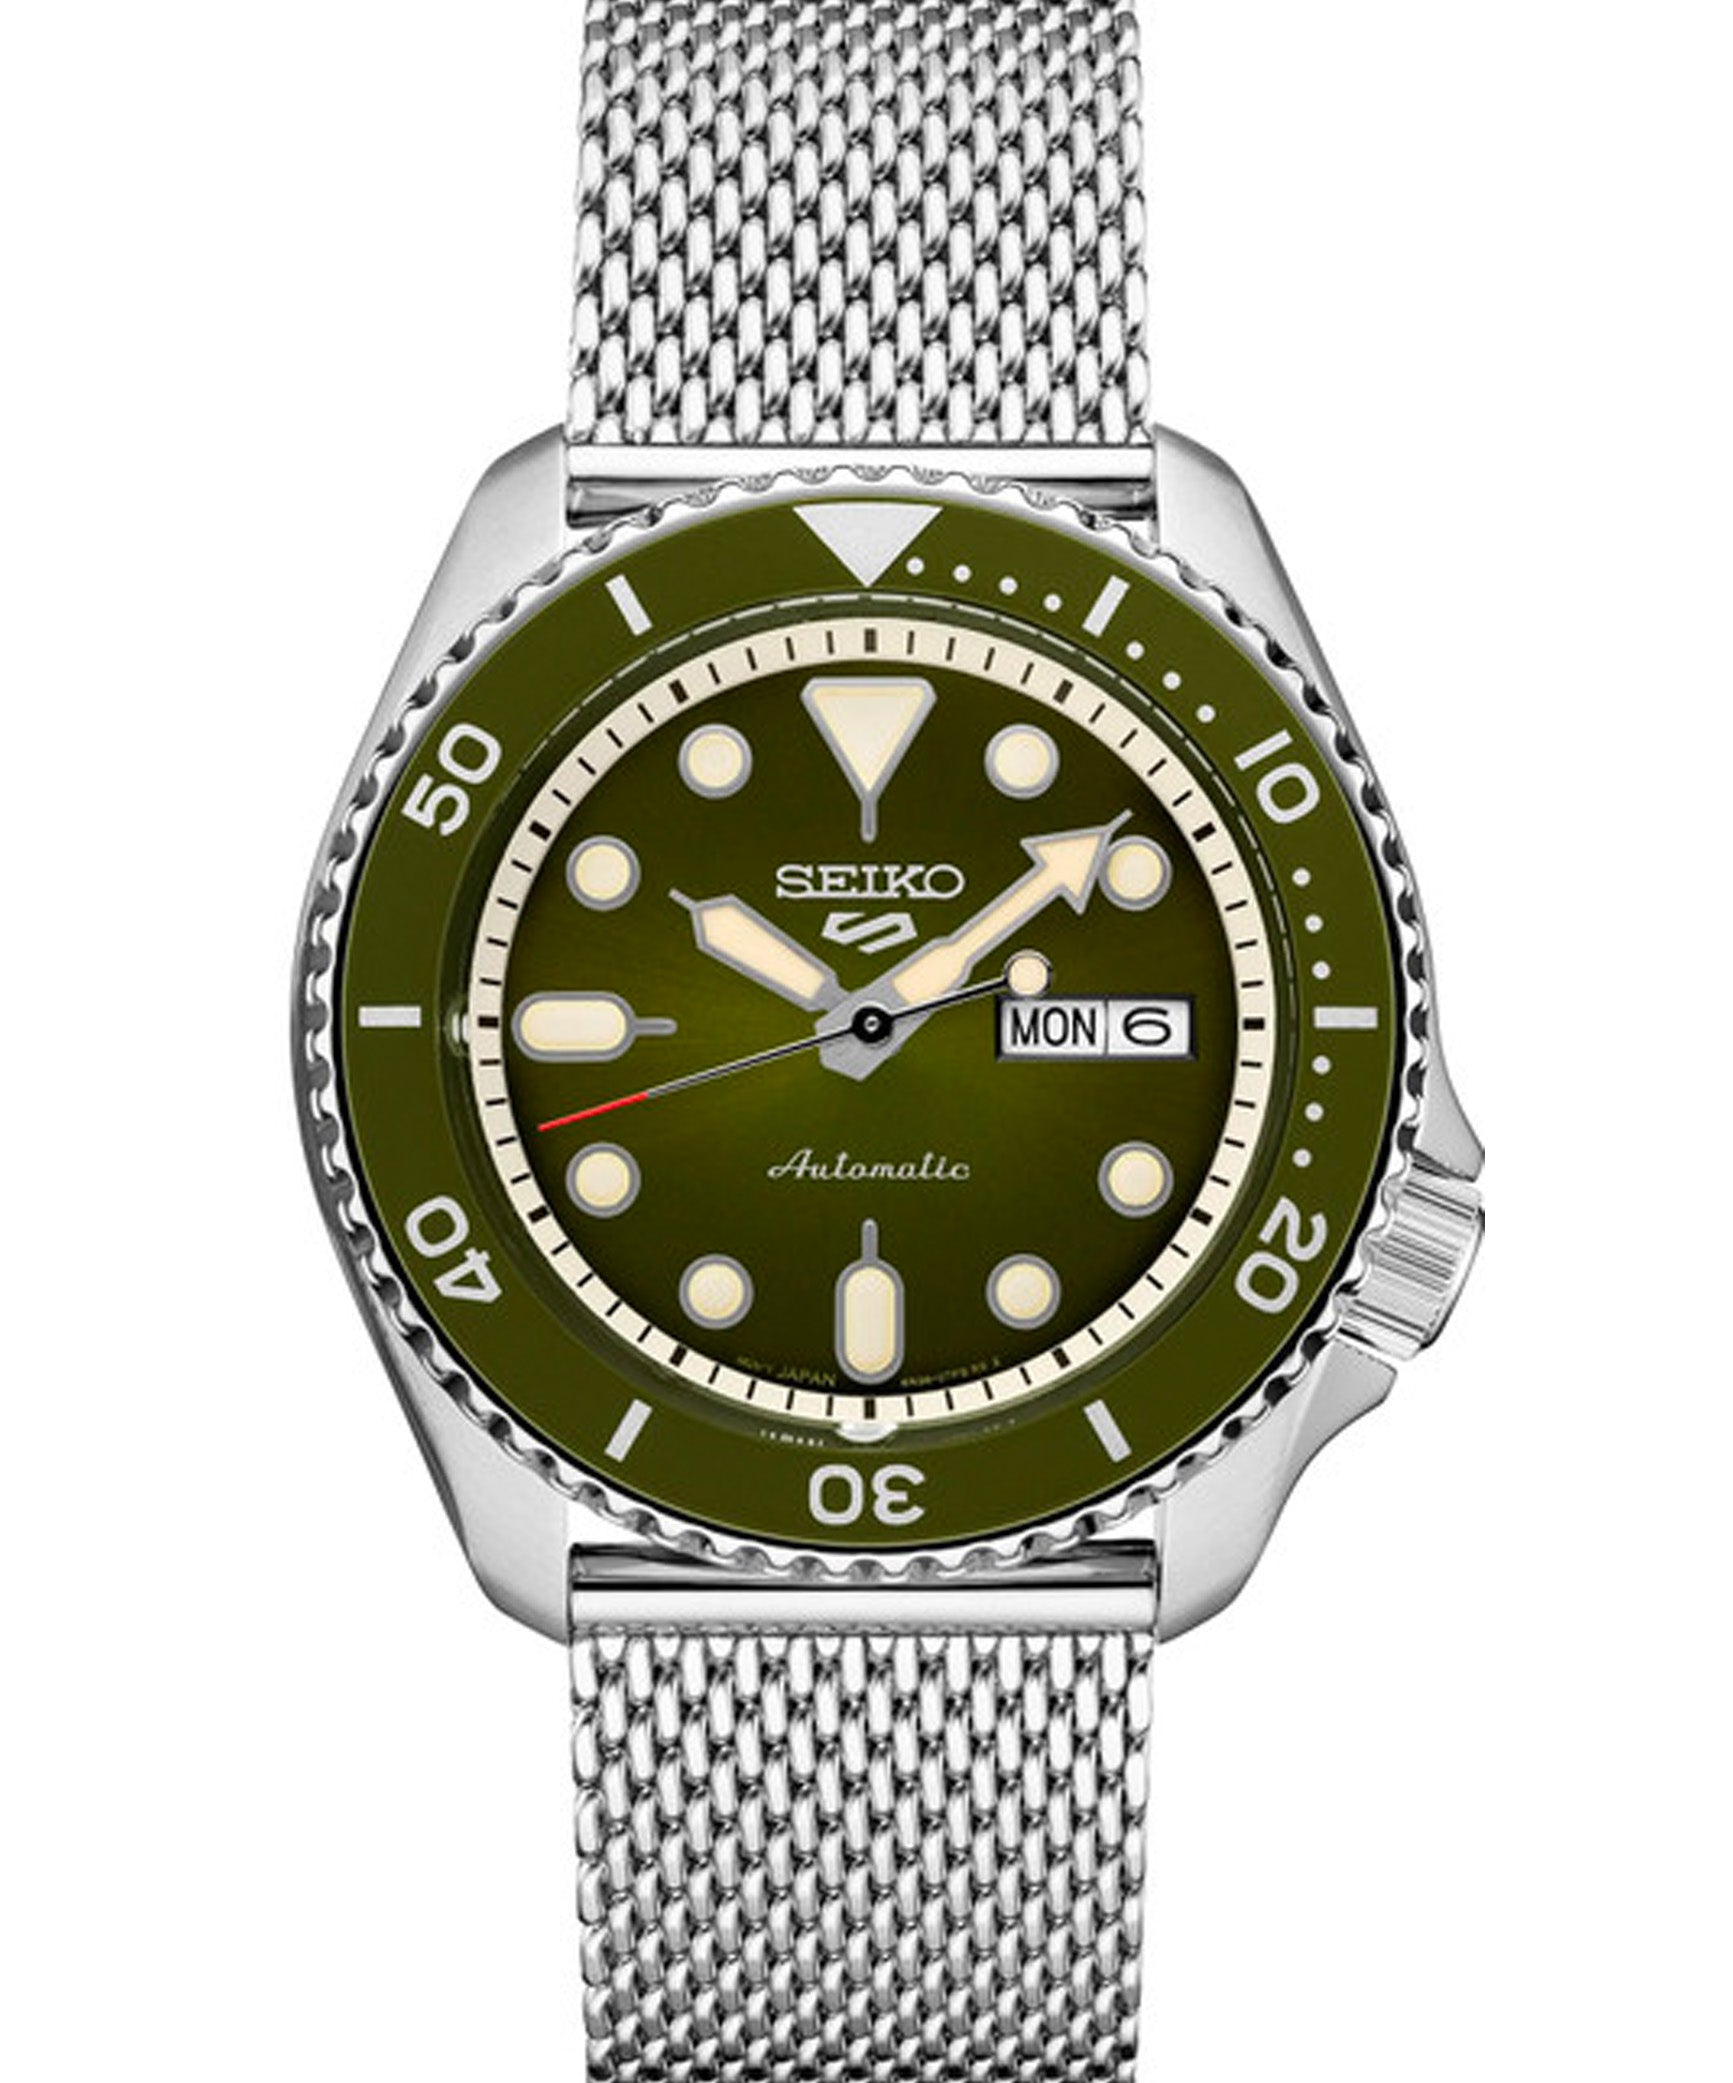 Seiko Men's Sports Mechanical Watch Analog, Green Dial Silver Stainless Band, SRPD75K